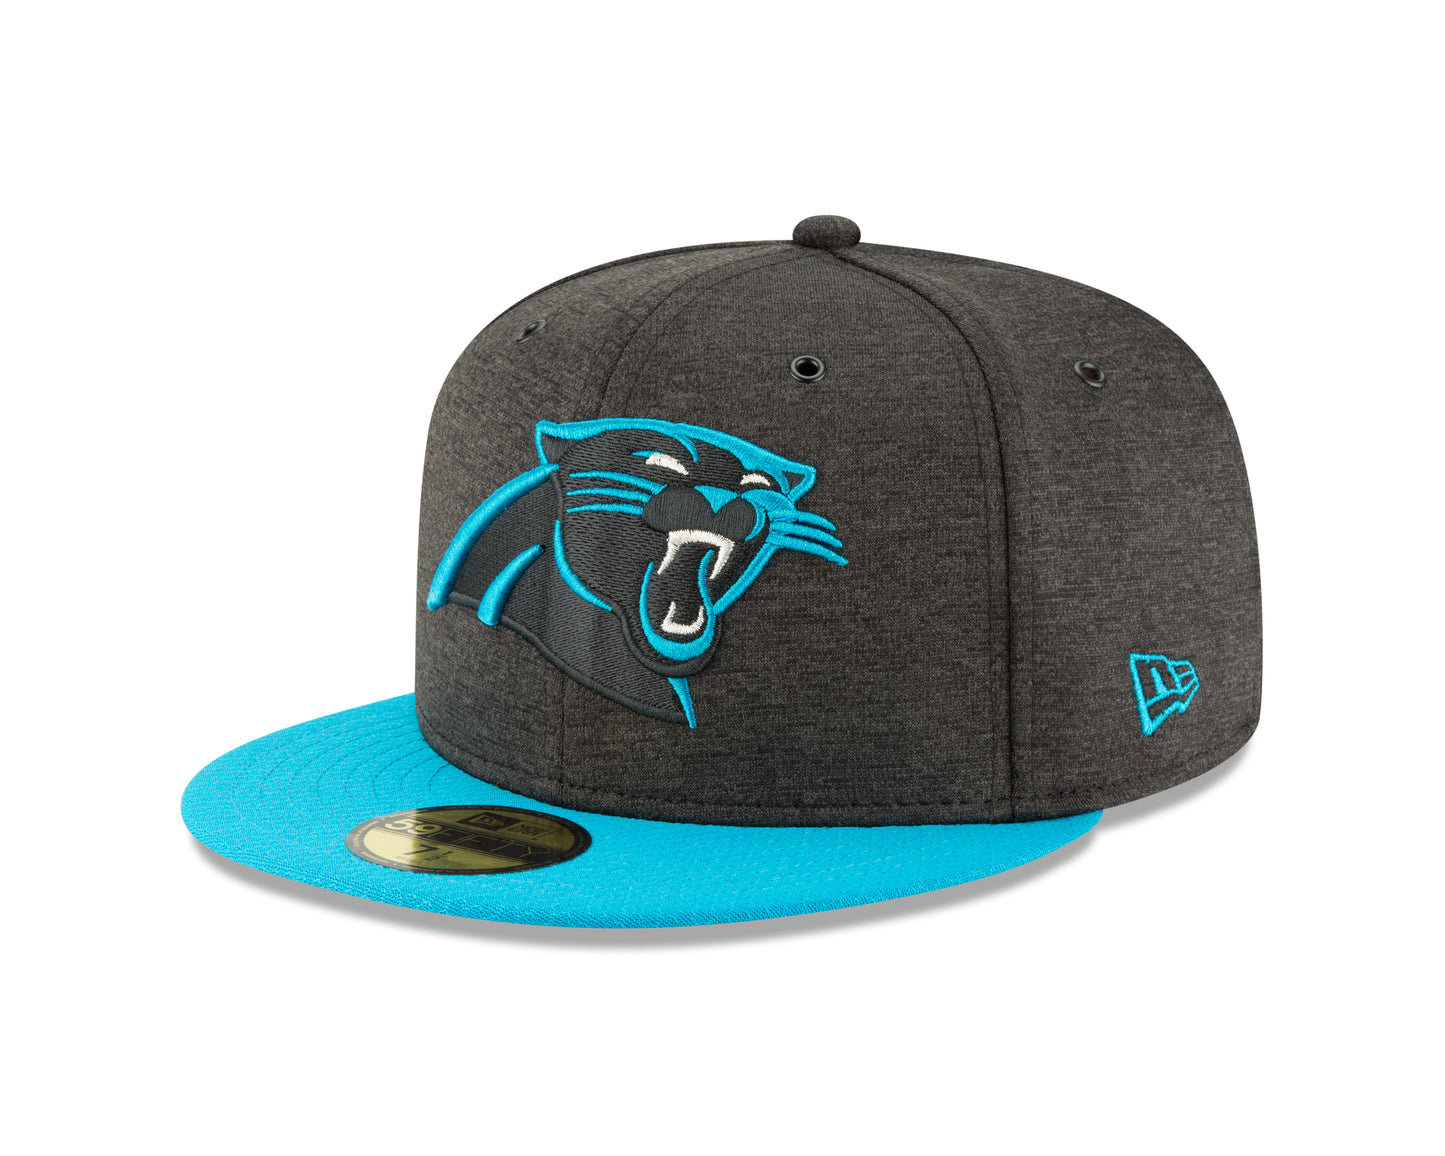 Carolina Panthers New Era 2018 NFL Sideline Home 59FIFTY Fitted Hat - Black/Blue